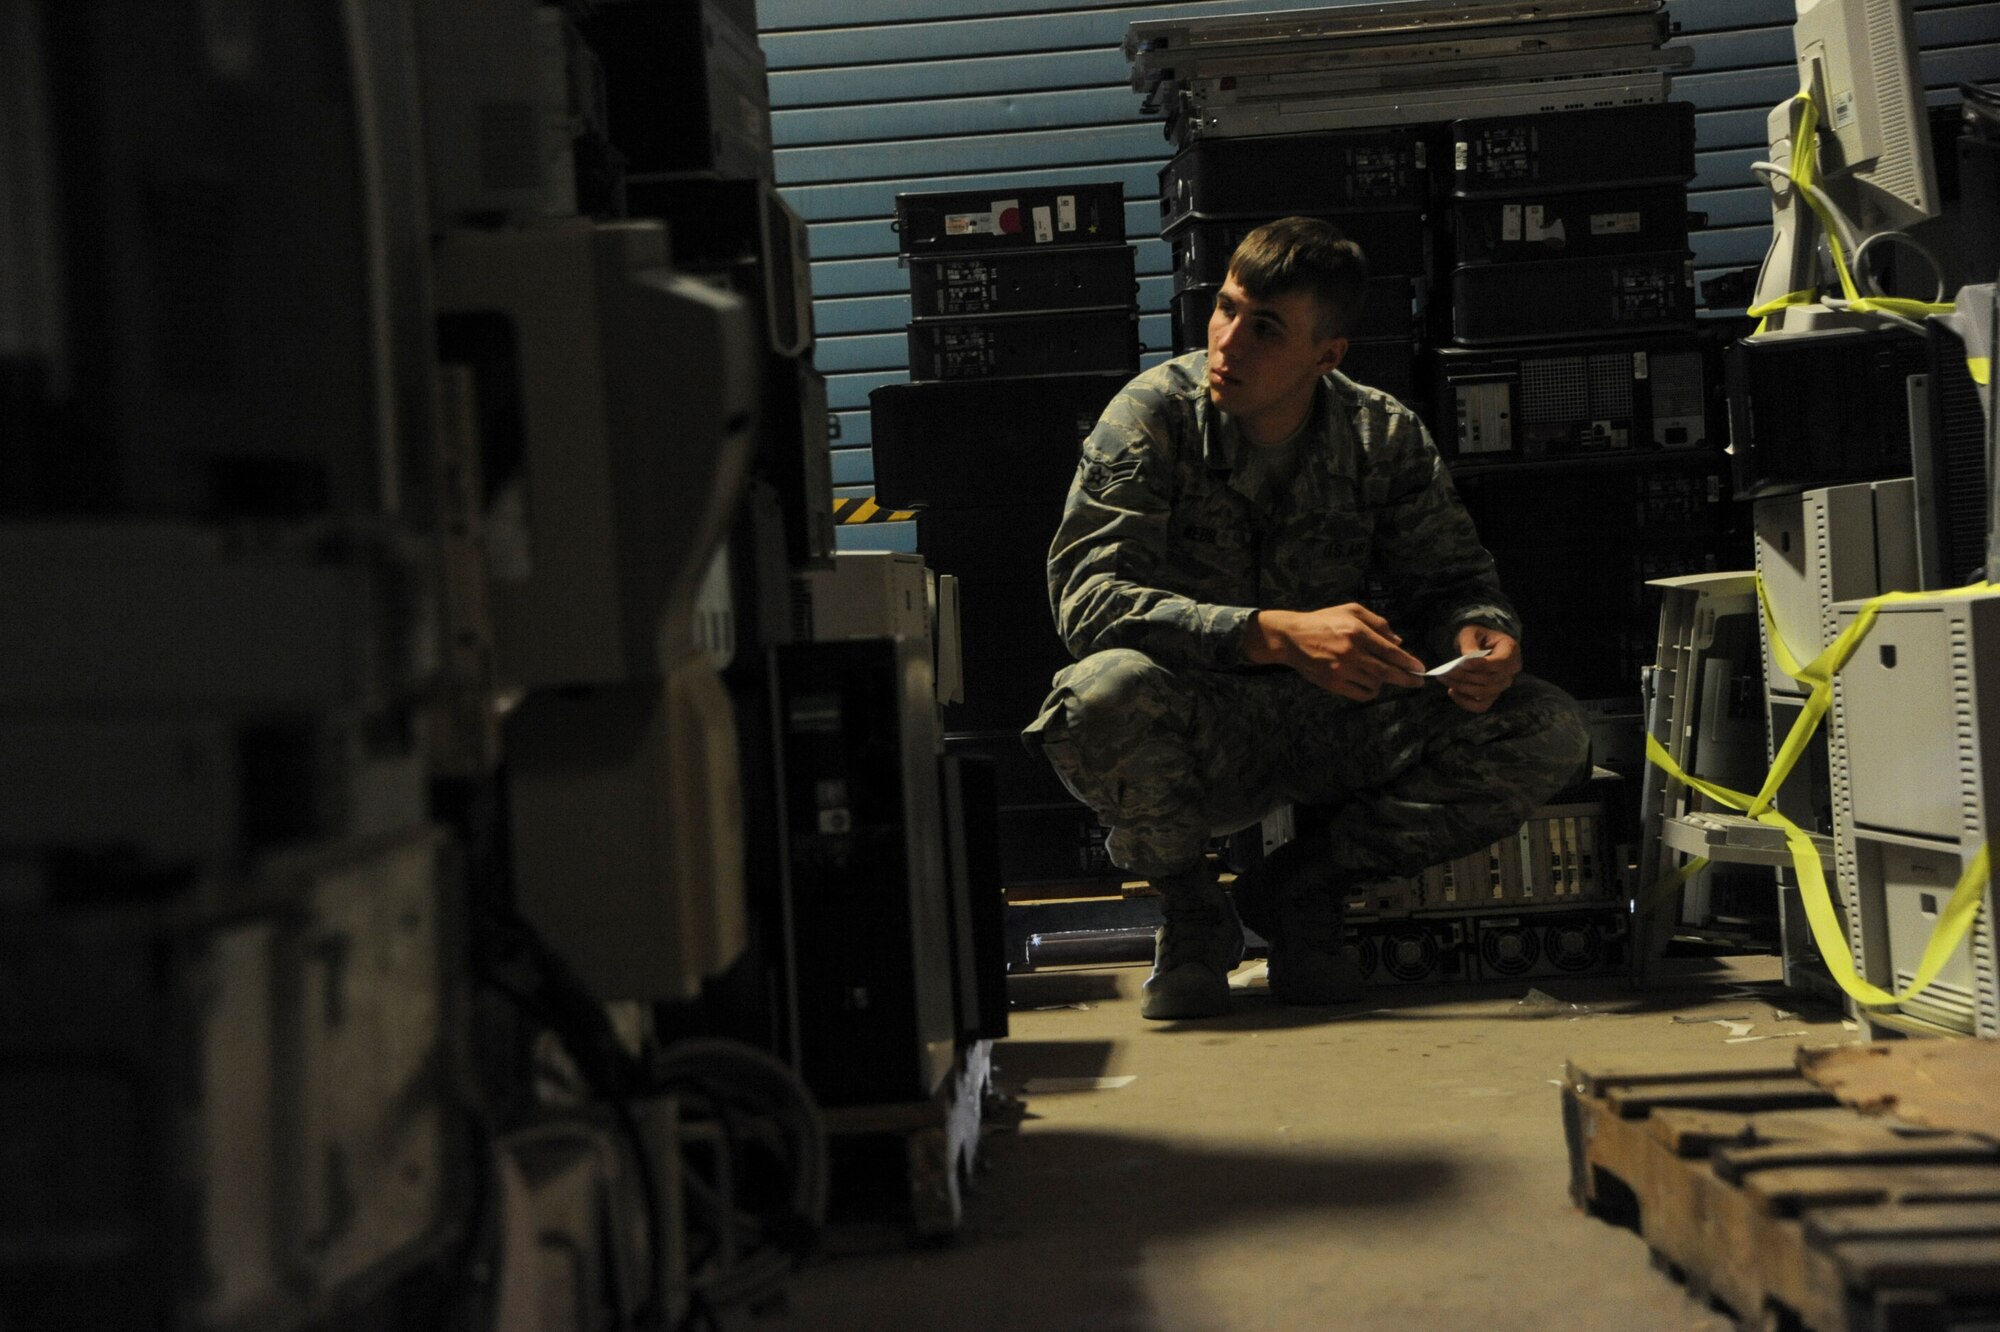 U.S. Air Force Airman 1st Class Anthony Webb, 612th Air Communications Squadron command and control systems technician, searches for equipment at Davis-Monthan Air Force Base, Ariz., April 28, 2016. Webb maintains servers and other communications equipment. (U.S. Air Force photo by Airman Nathan H. Barbour/Released)